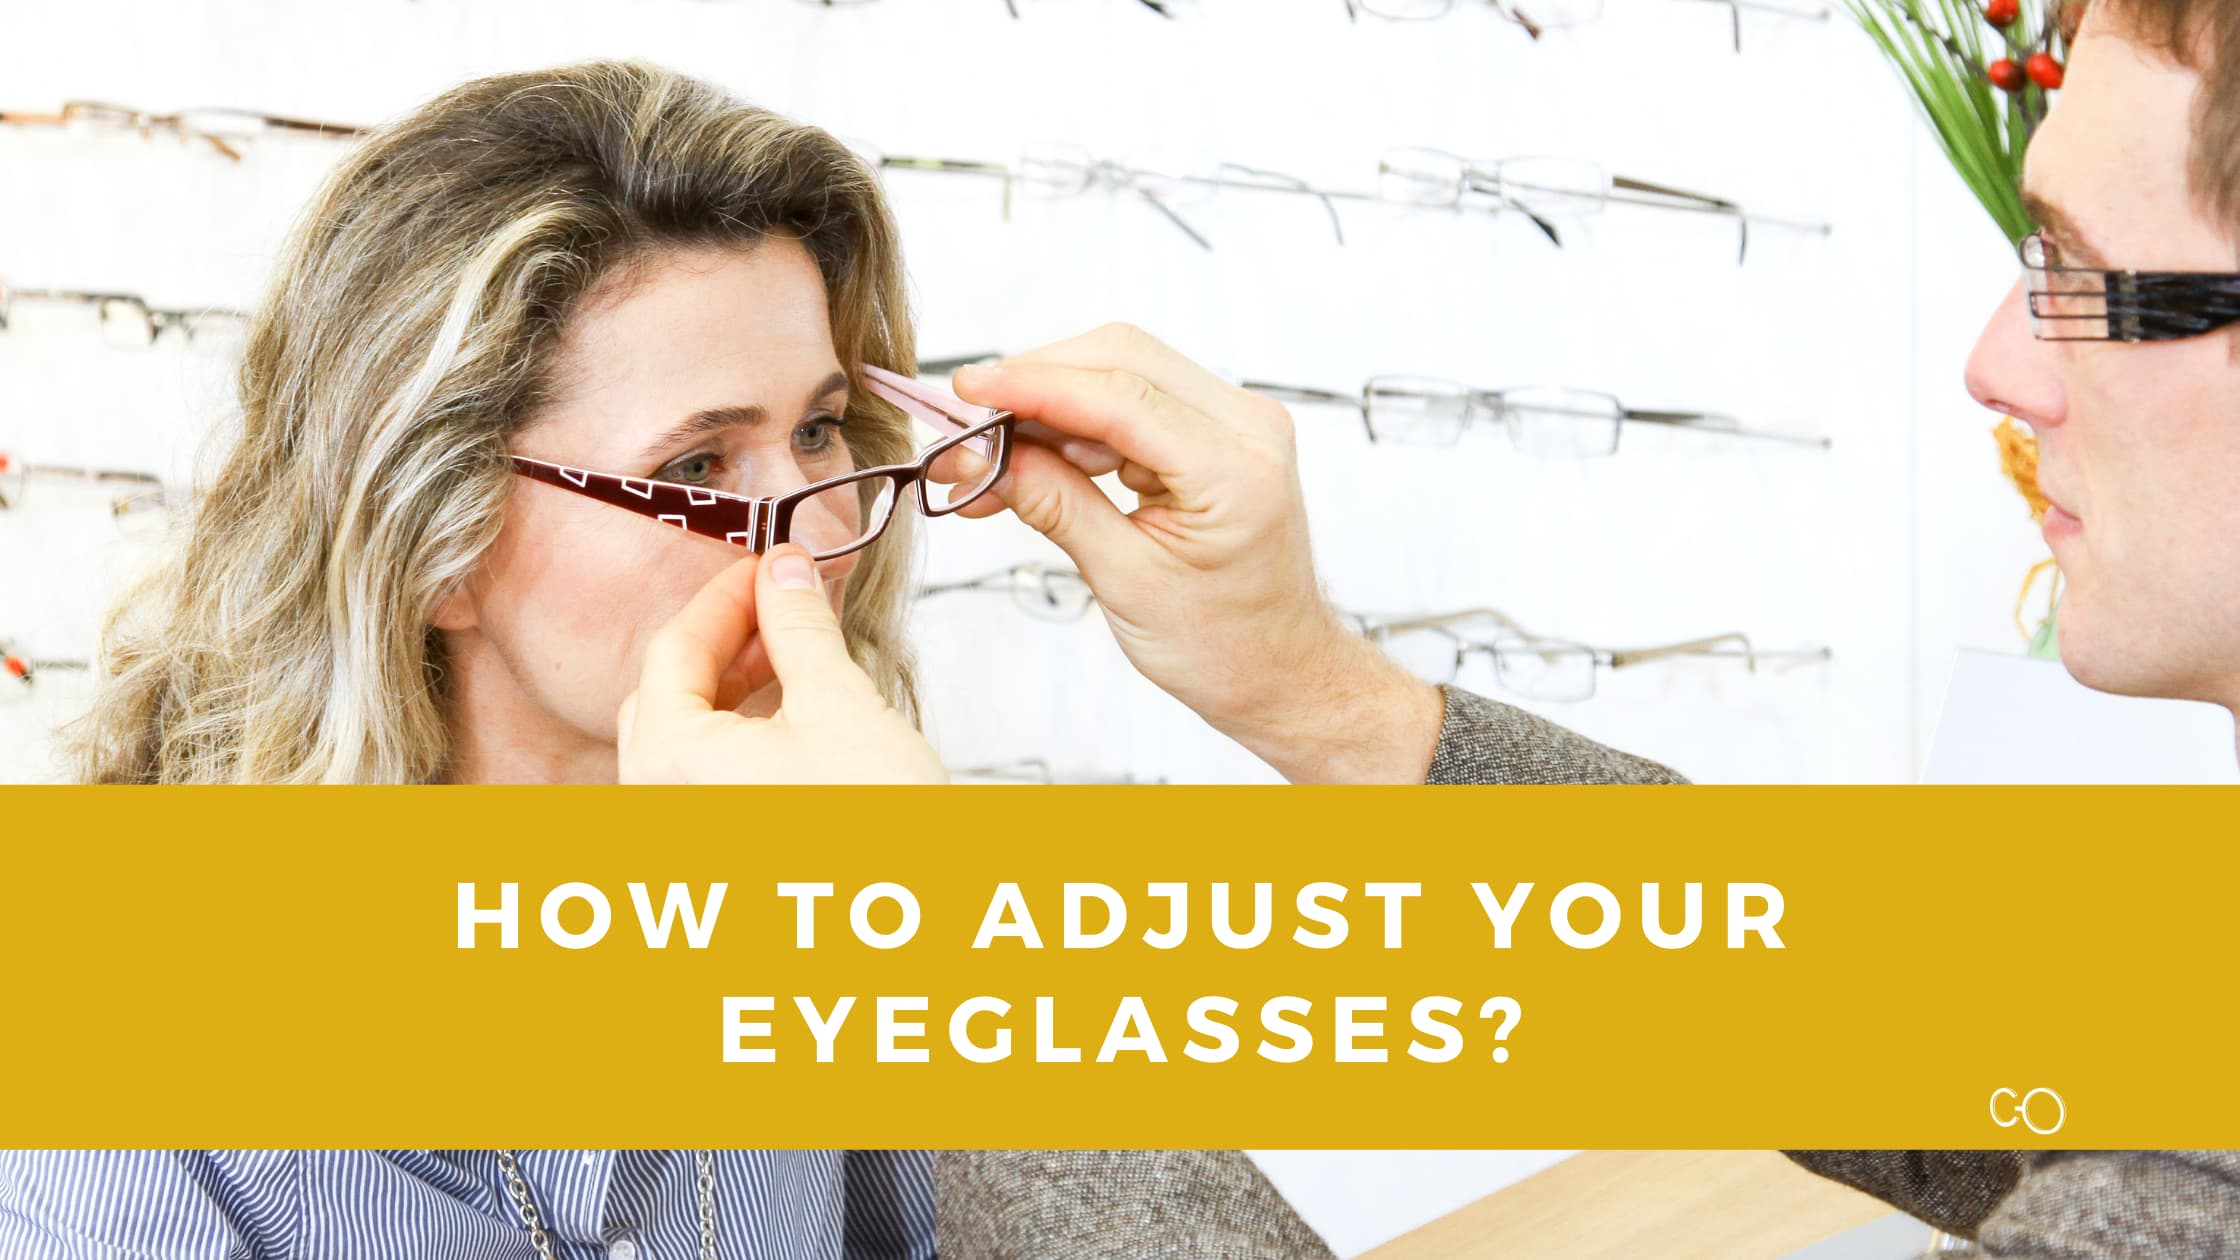 How to Adjust Your Eyeglasses?